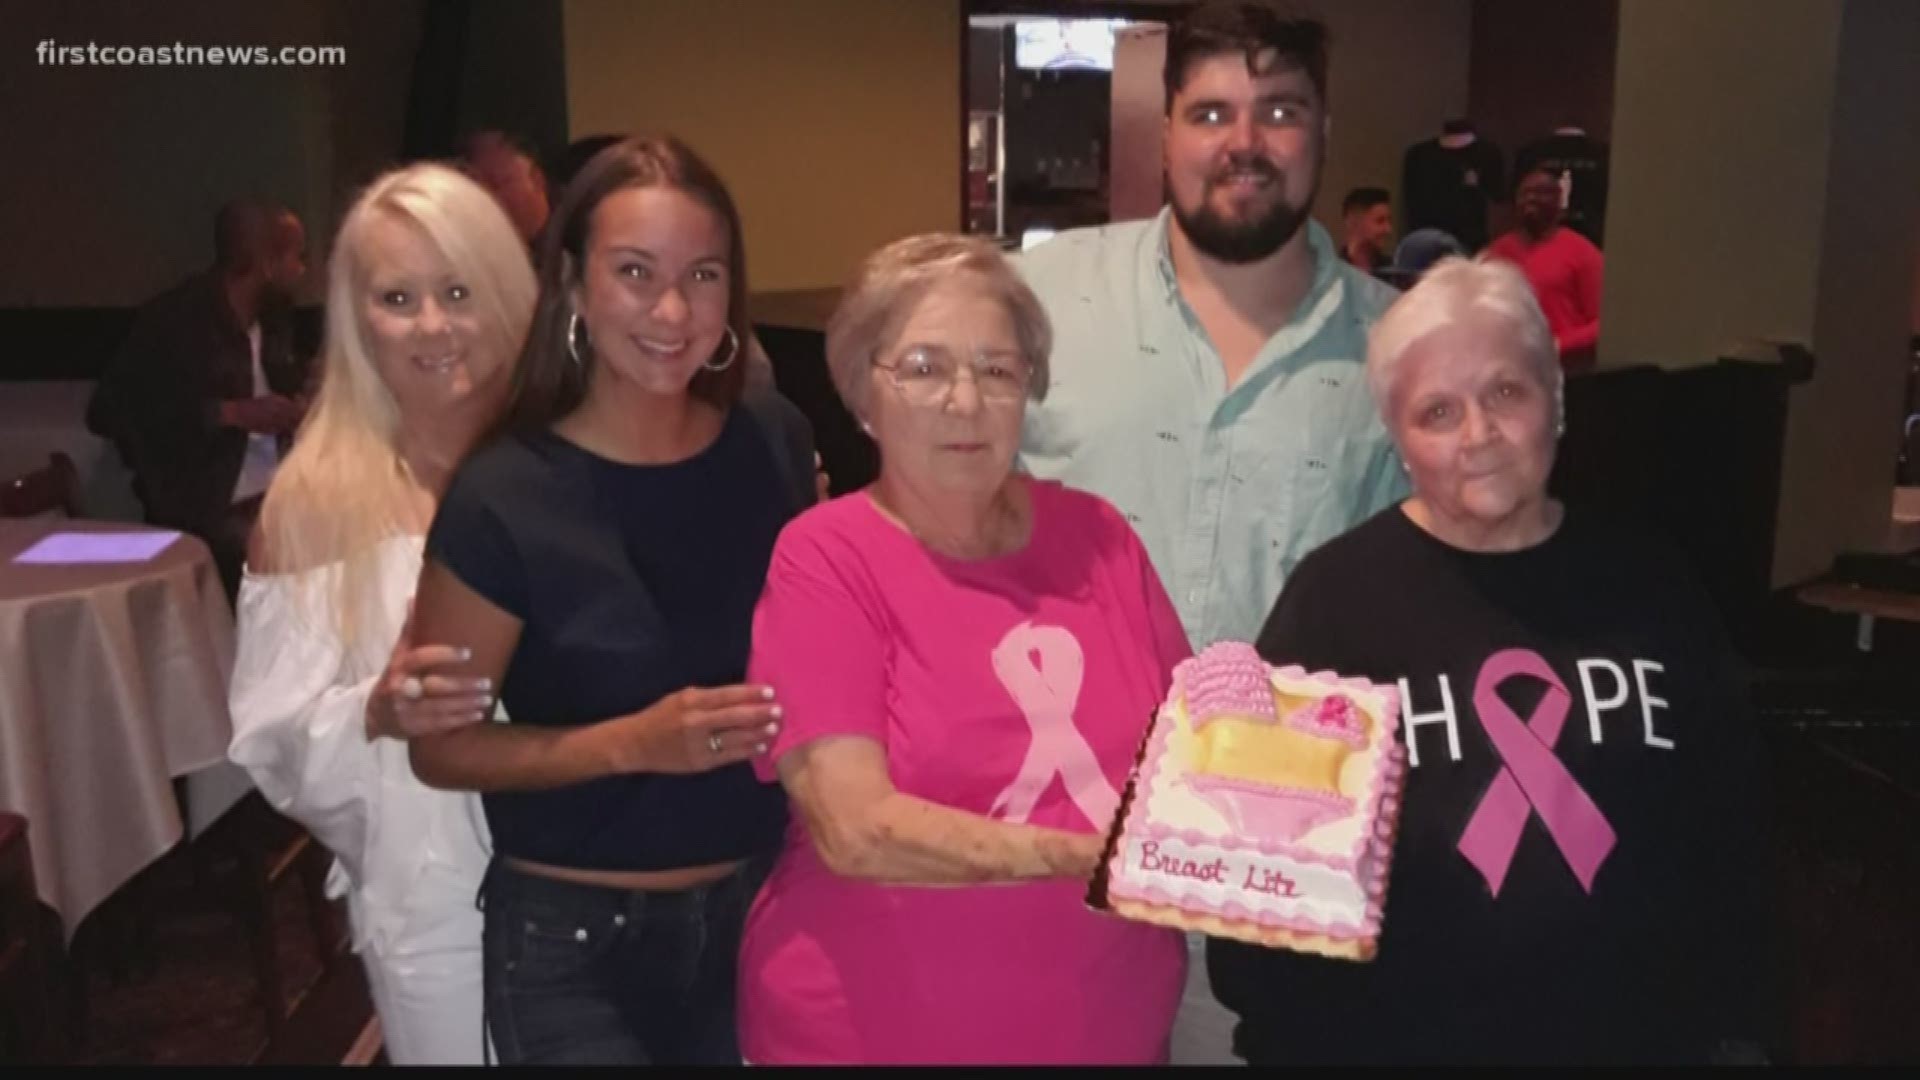 Jane Schlager, a military veteran, breast cancer survivor and comedian, raised funds for the Buddy Bus while performing at a comedy club.